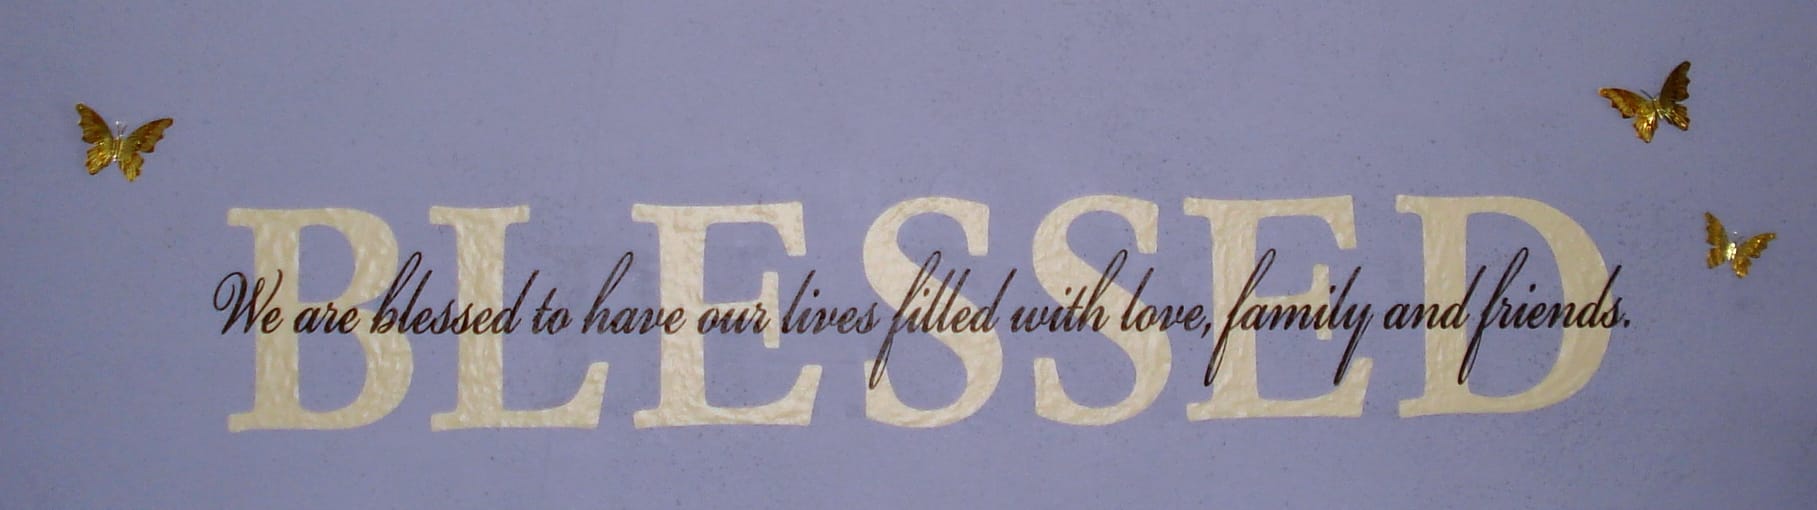 Bless Wall Graphic with blue background